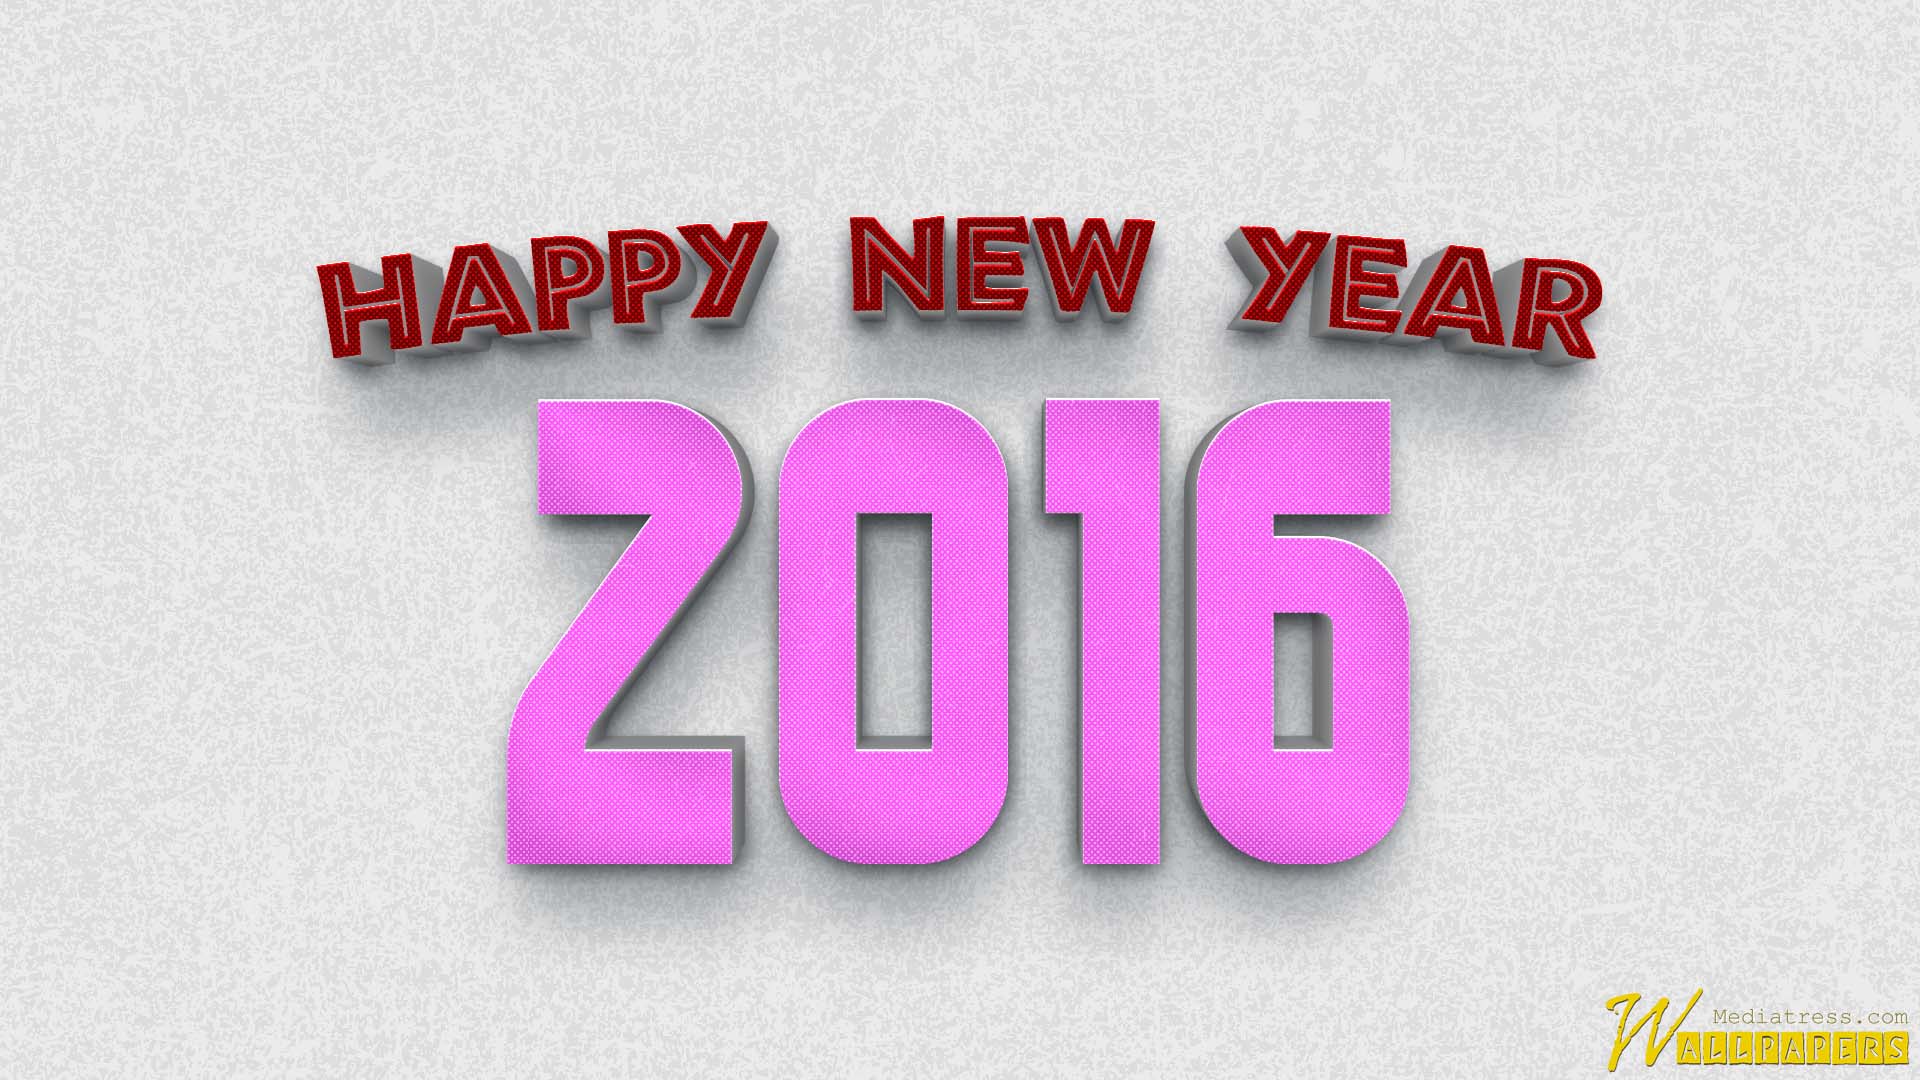 High Resolution Happy New Year 2016 PC Wallpaper Full Size